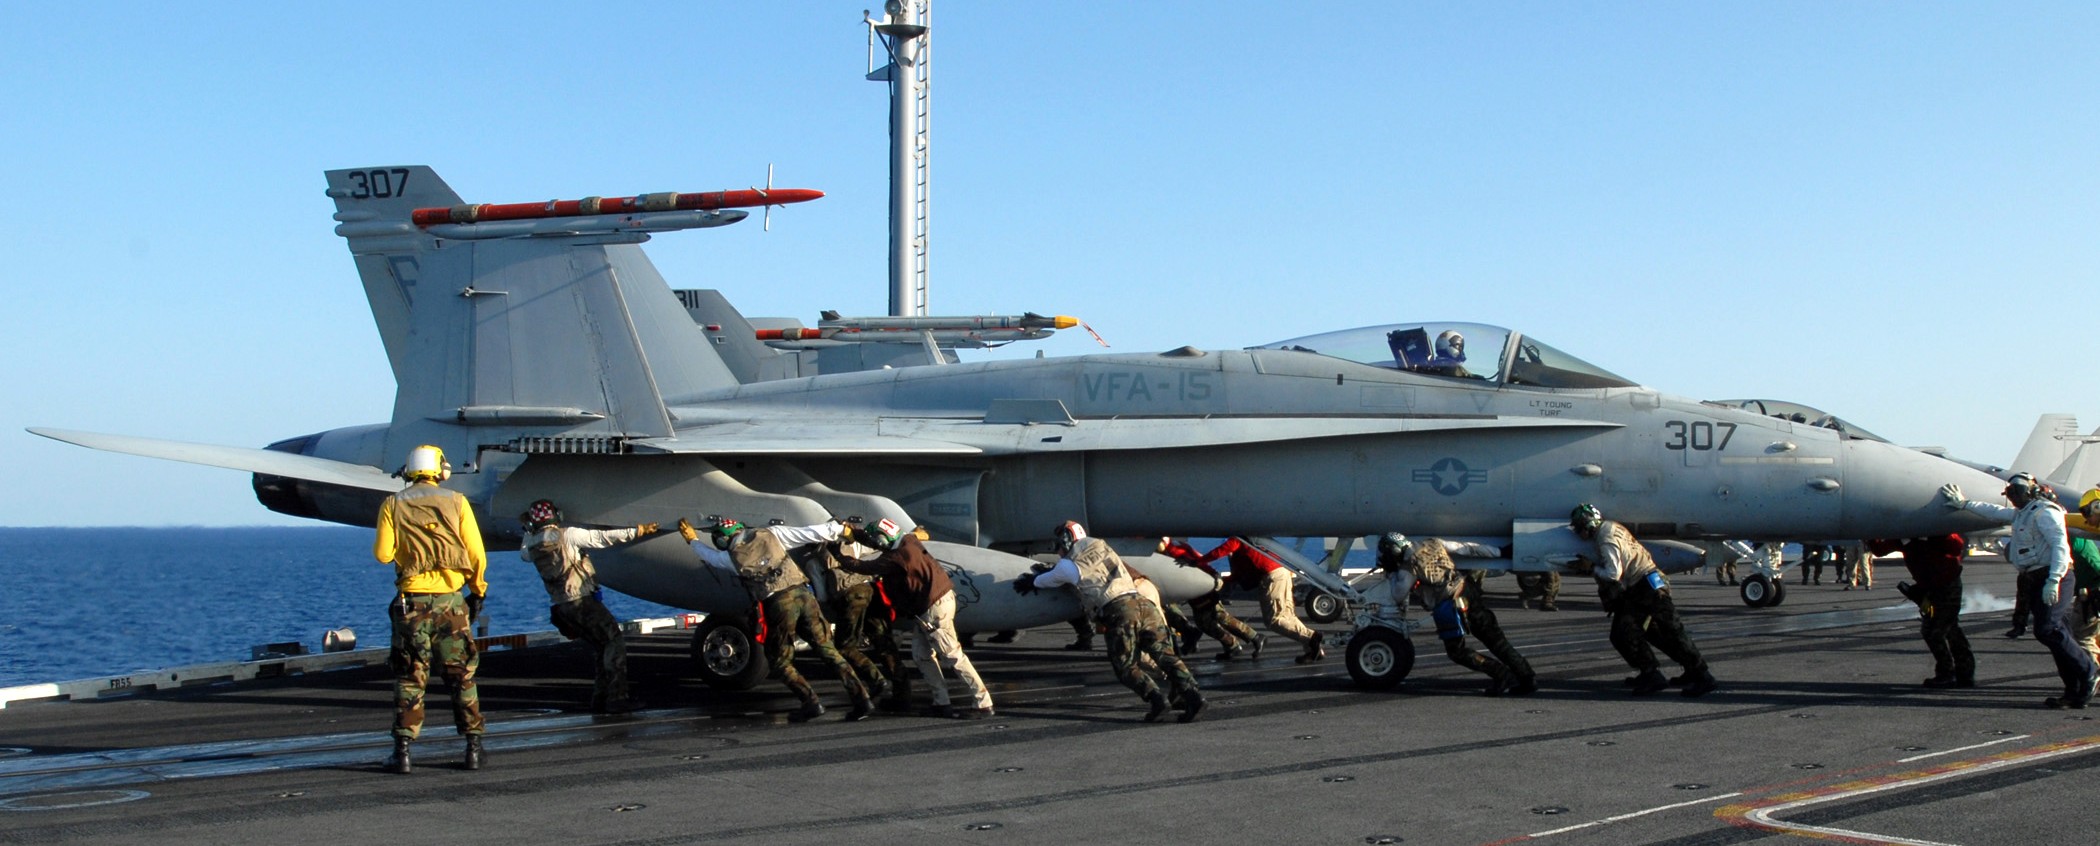 vfa-15 valions strike fighter squadron f/a-18c hornet cvn-71 uss theodore roosevelt cvw-8 us navy 59p